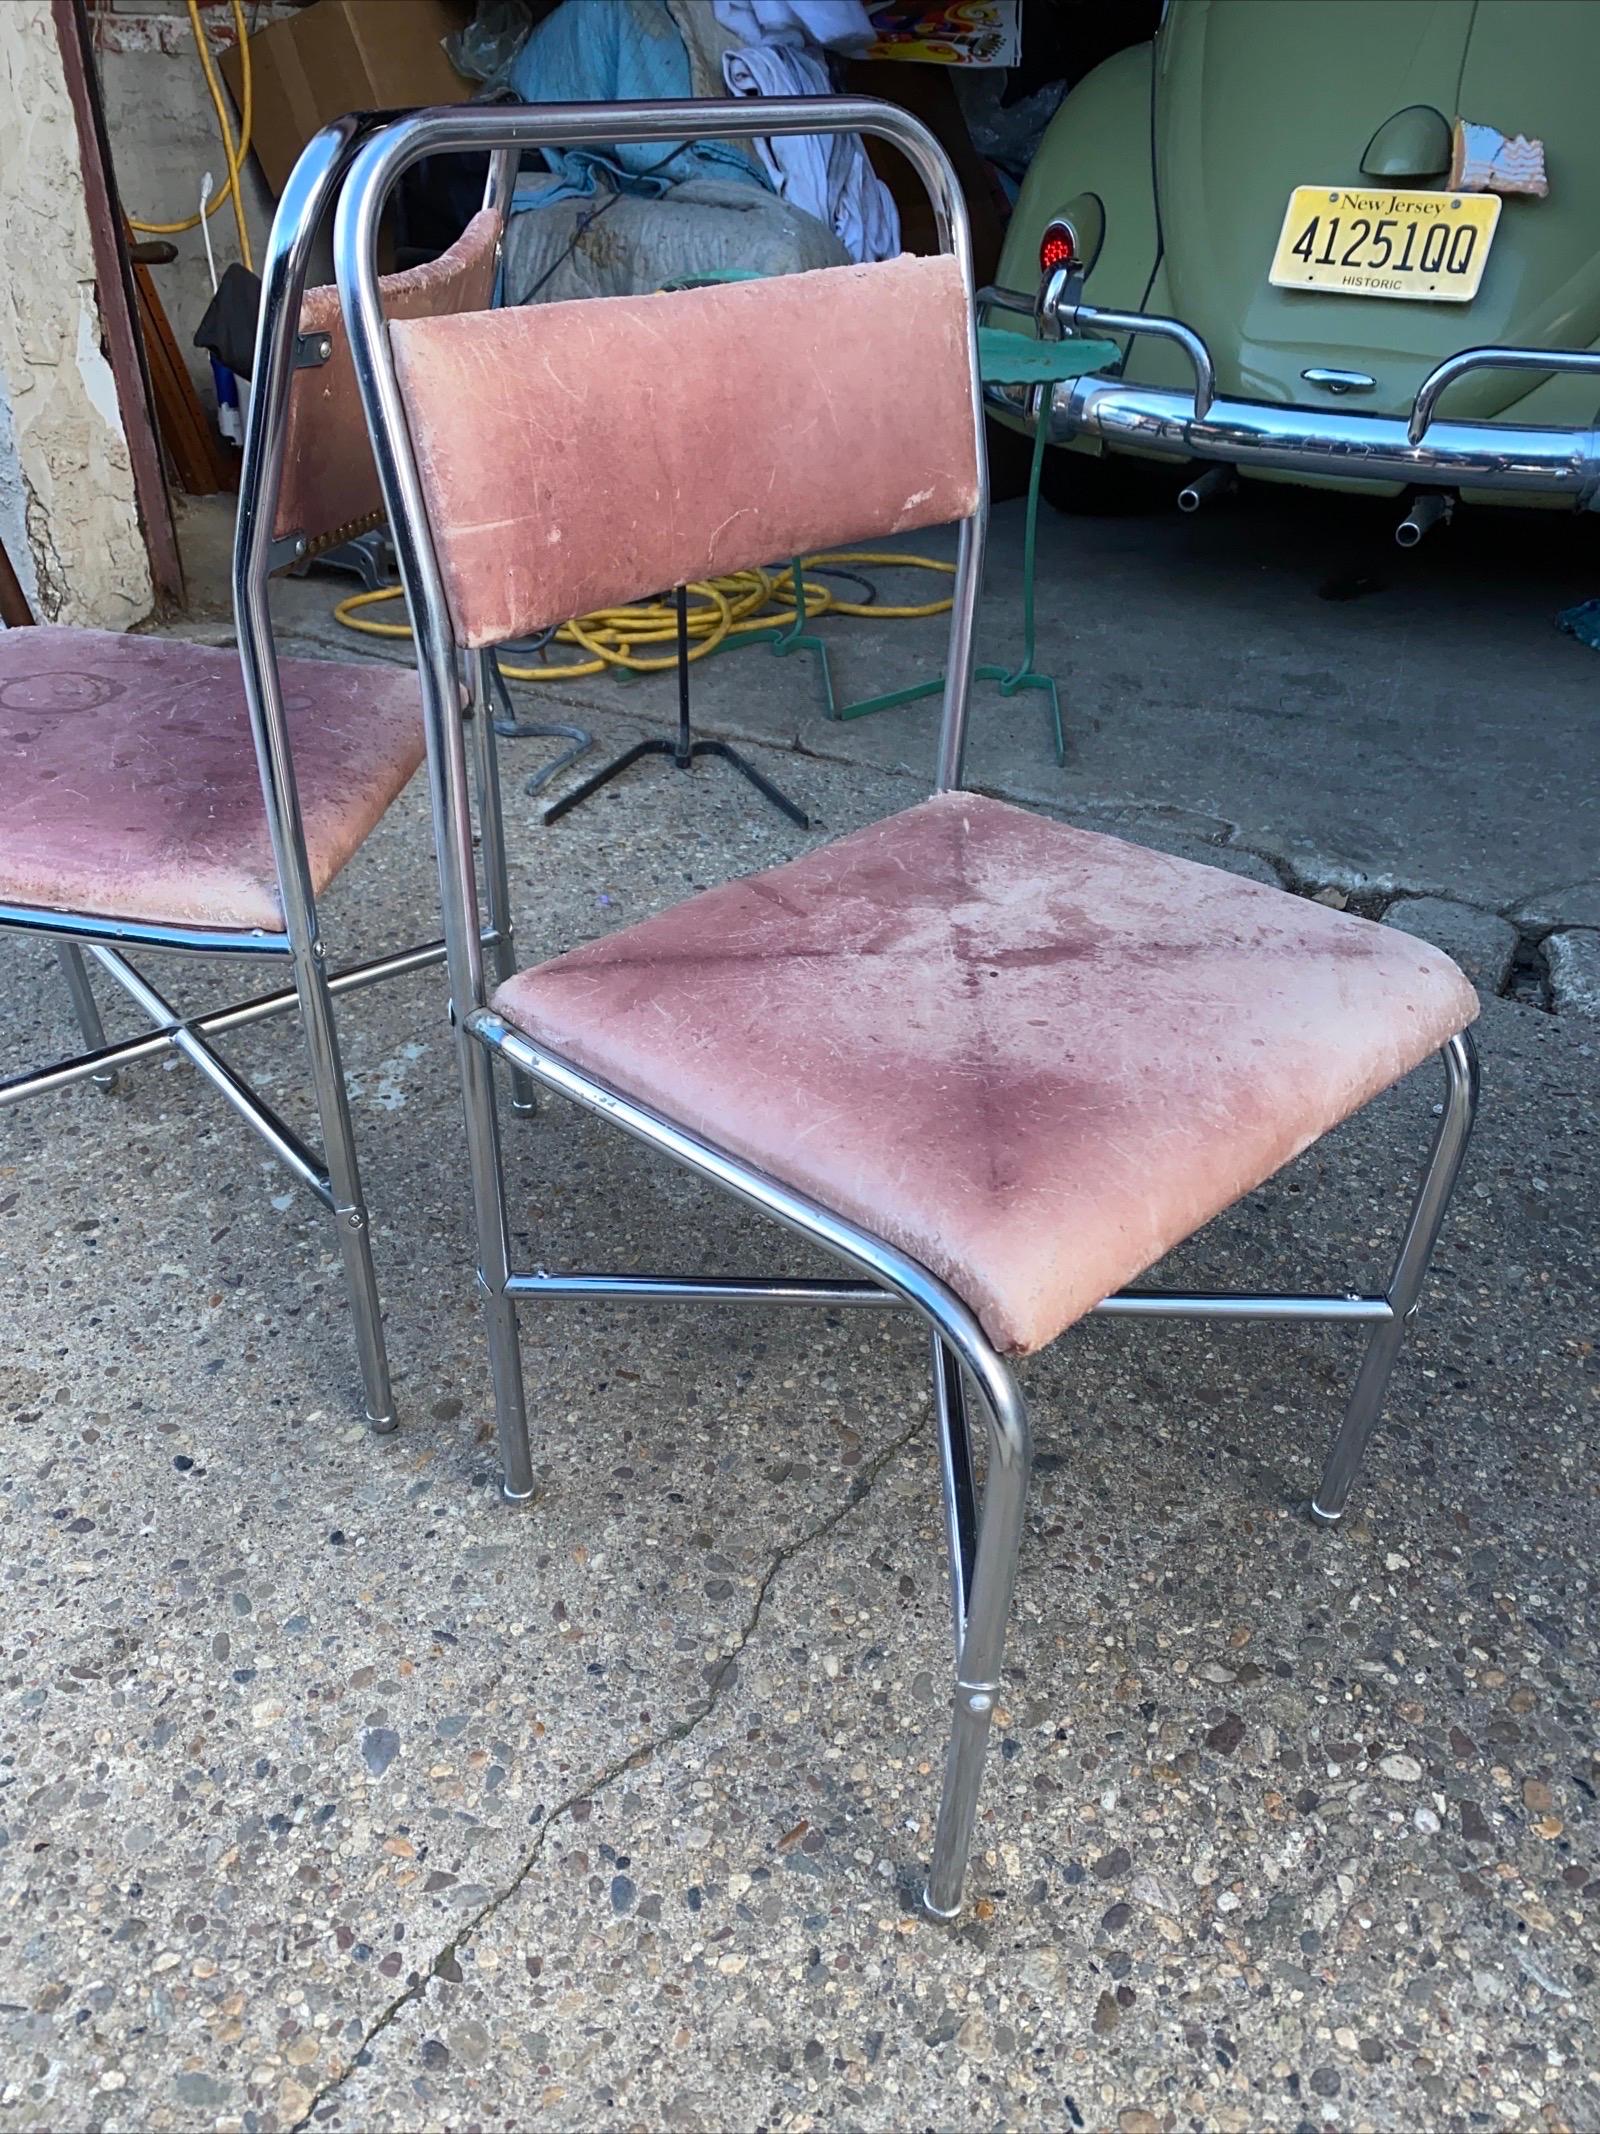 Pair of hard to find Lloyd Chrome Chairs from the 1930's.  Designed by Kem Weber.  Couple repairs as seen in photos that discolored the chrome a bit.  Older leather needs to be replaced.  Chrome is very good for almost 100 year old chairs!